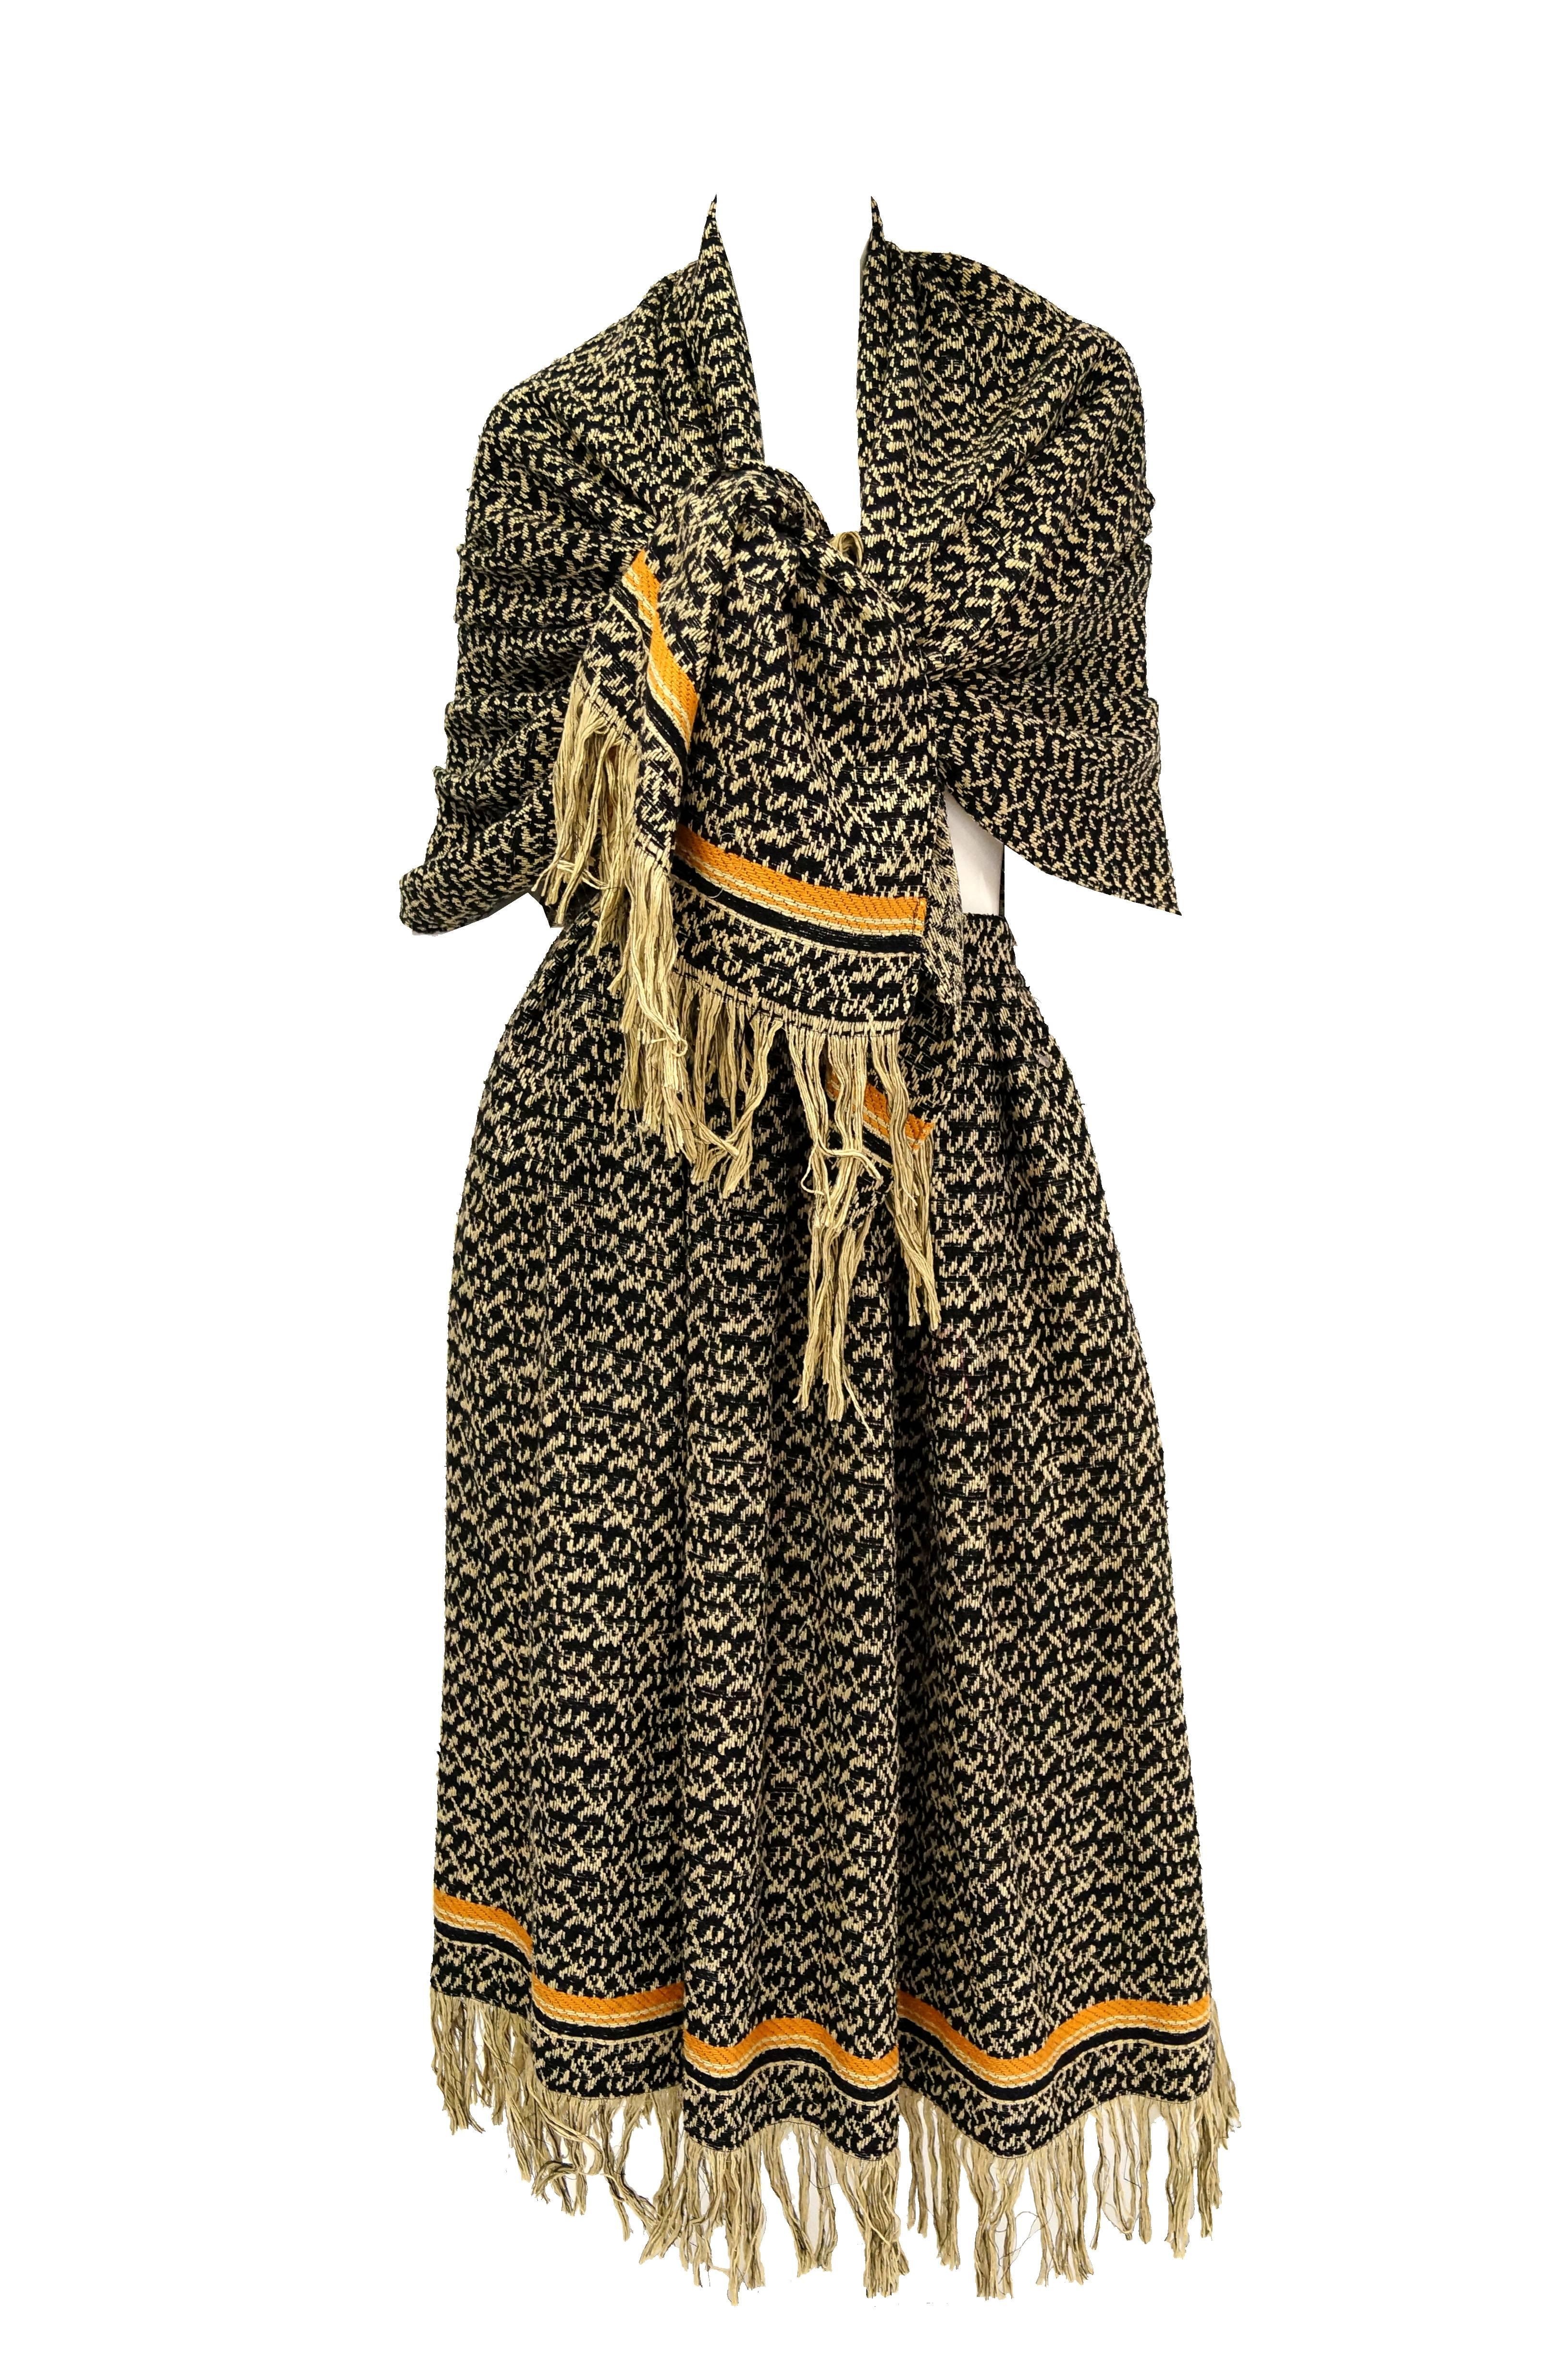 Beautiful woven skirt and matching shawl in black and beige! This ensemble features a midi a - line skirt with gathered waist and wide waist band, as well as a wide, rectangular shawl. Skirt and shawl are in matching abstract repeating weave pattern